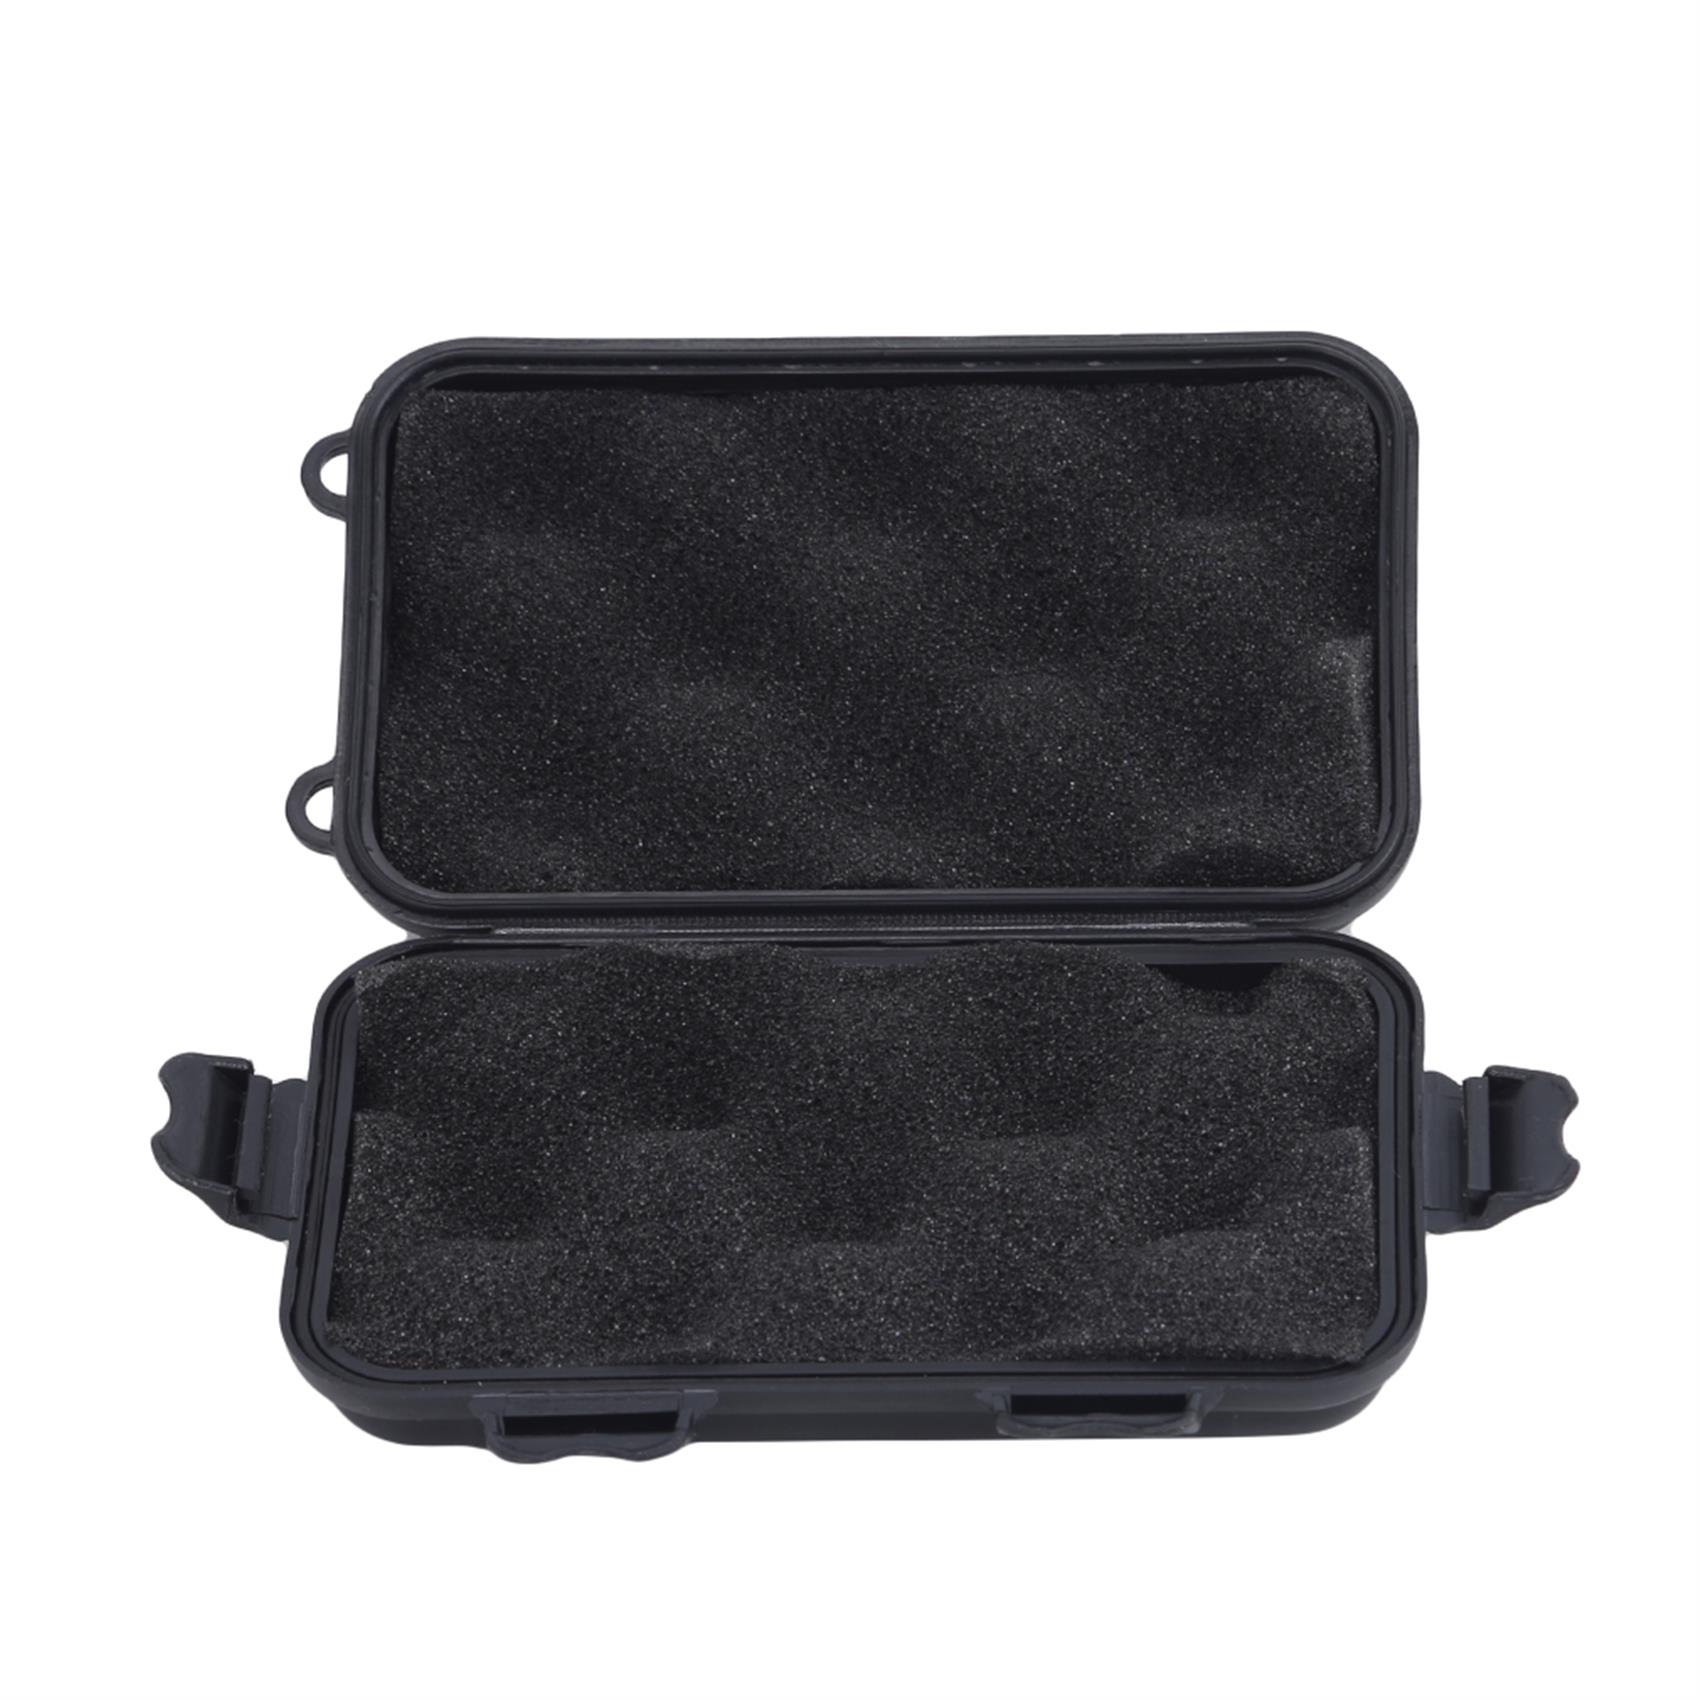 1pc Waterproof Shockproof Airtight Survival Box Black Dry Storage Container  For Hiking Hunting And Camping Adventures, Don't Miss These Great Deals